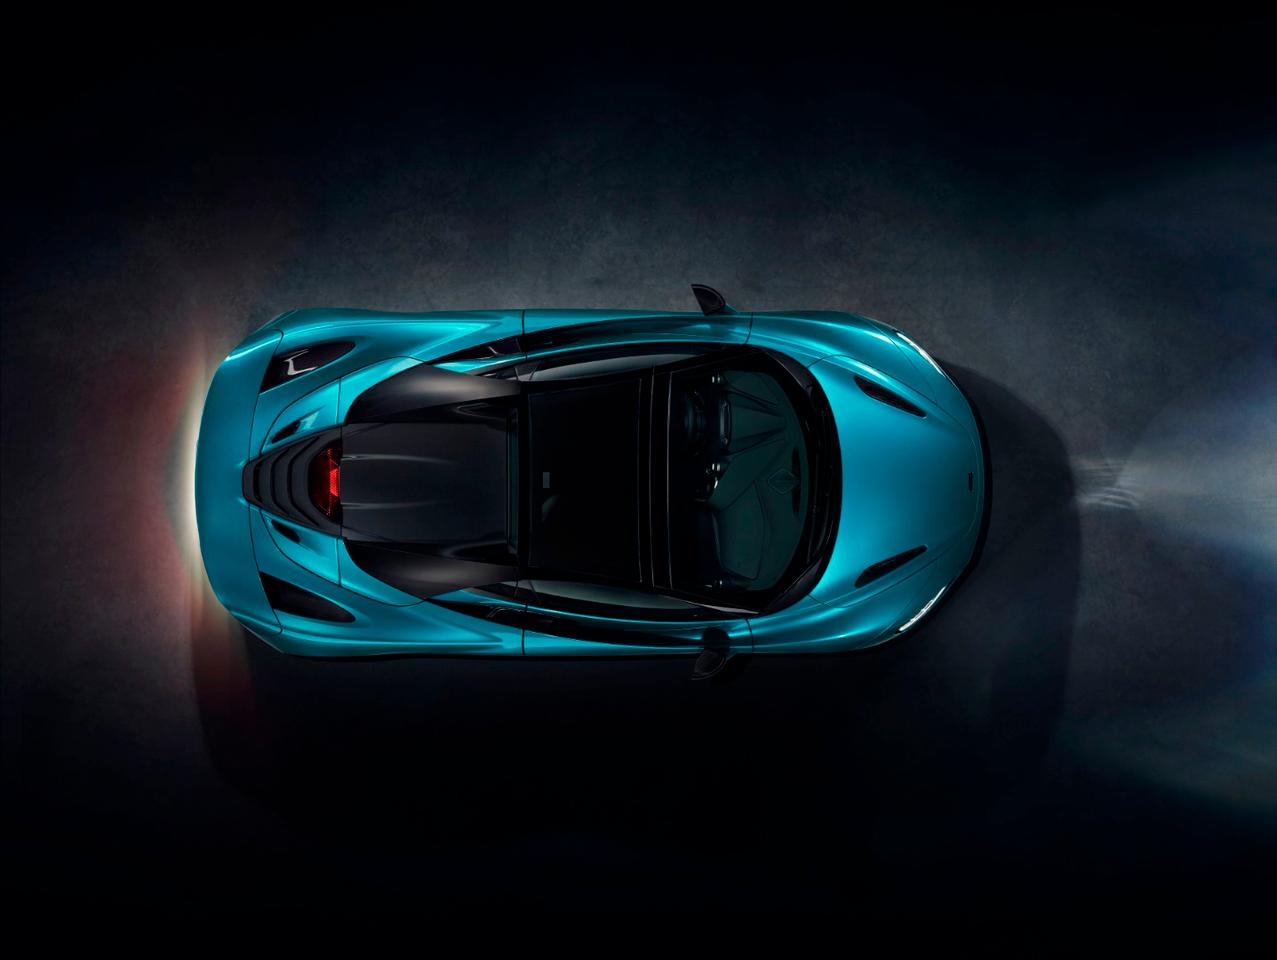 McLaren 720S Spider convertible: 202 mph with the top down, or 212 mph if it's closed